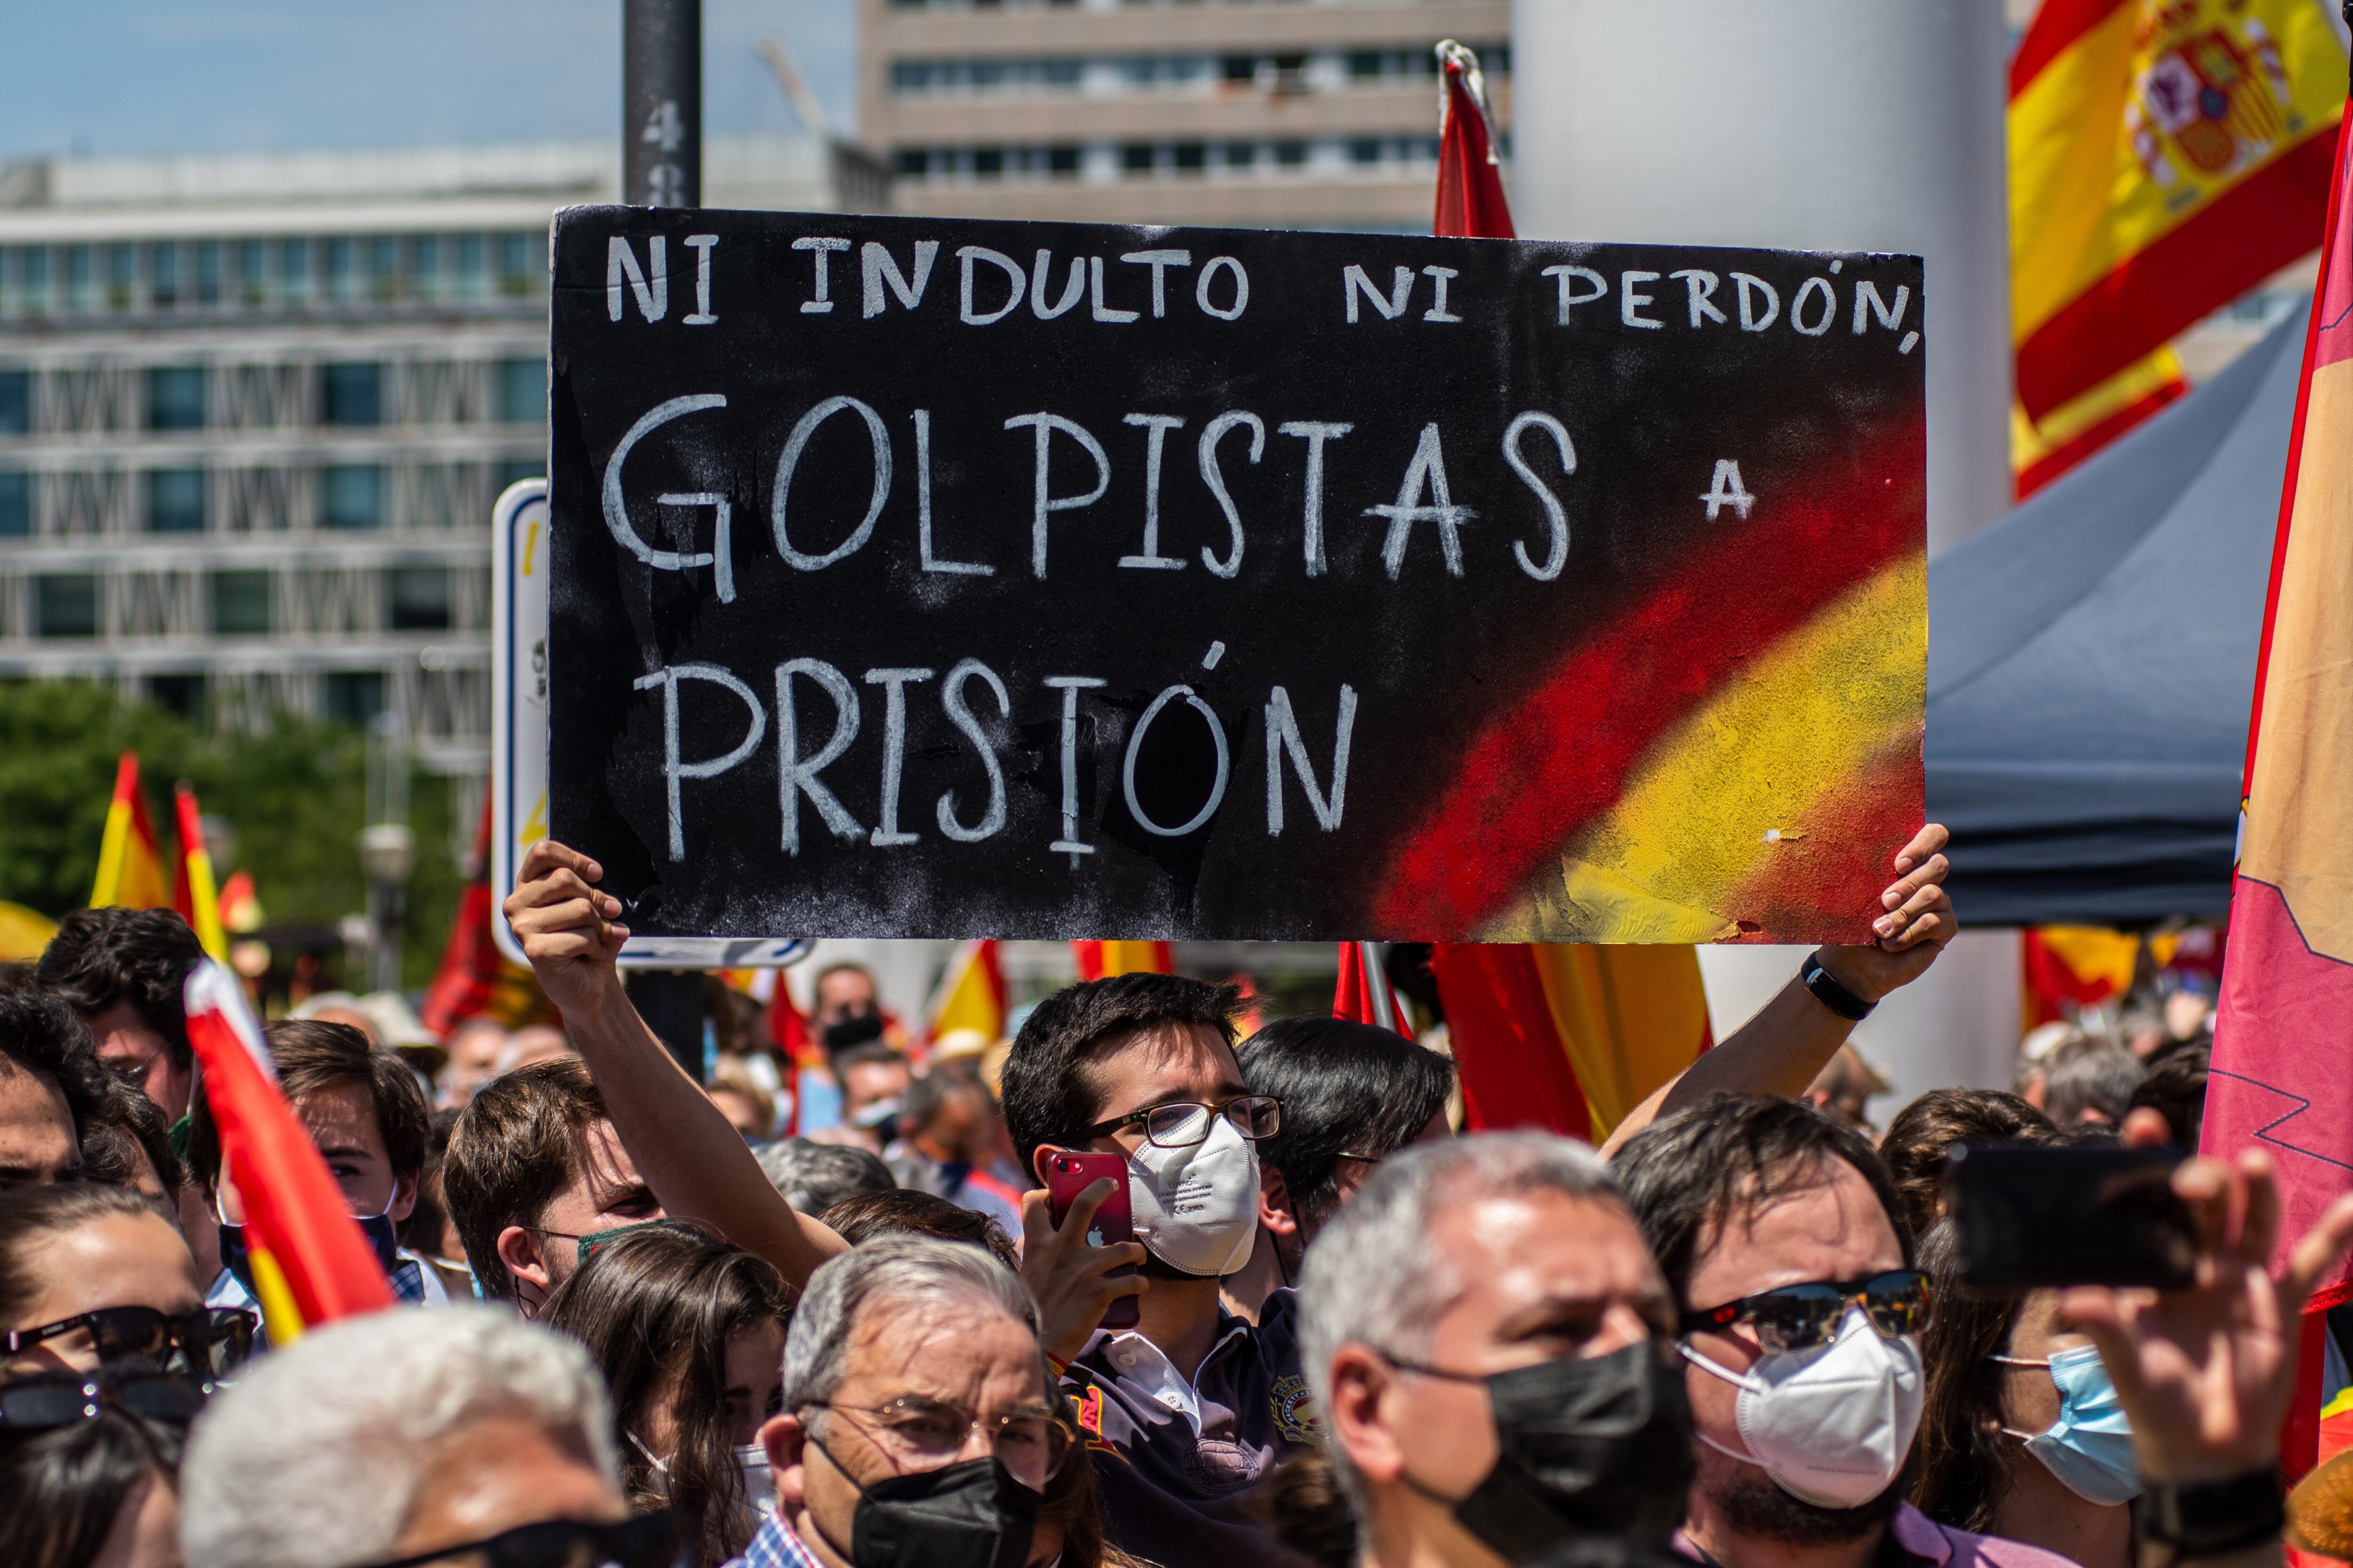 Protesters carrying placards and Spanish flags during a